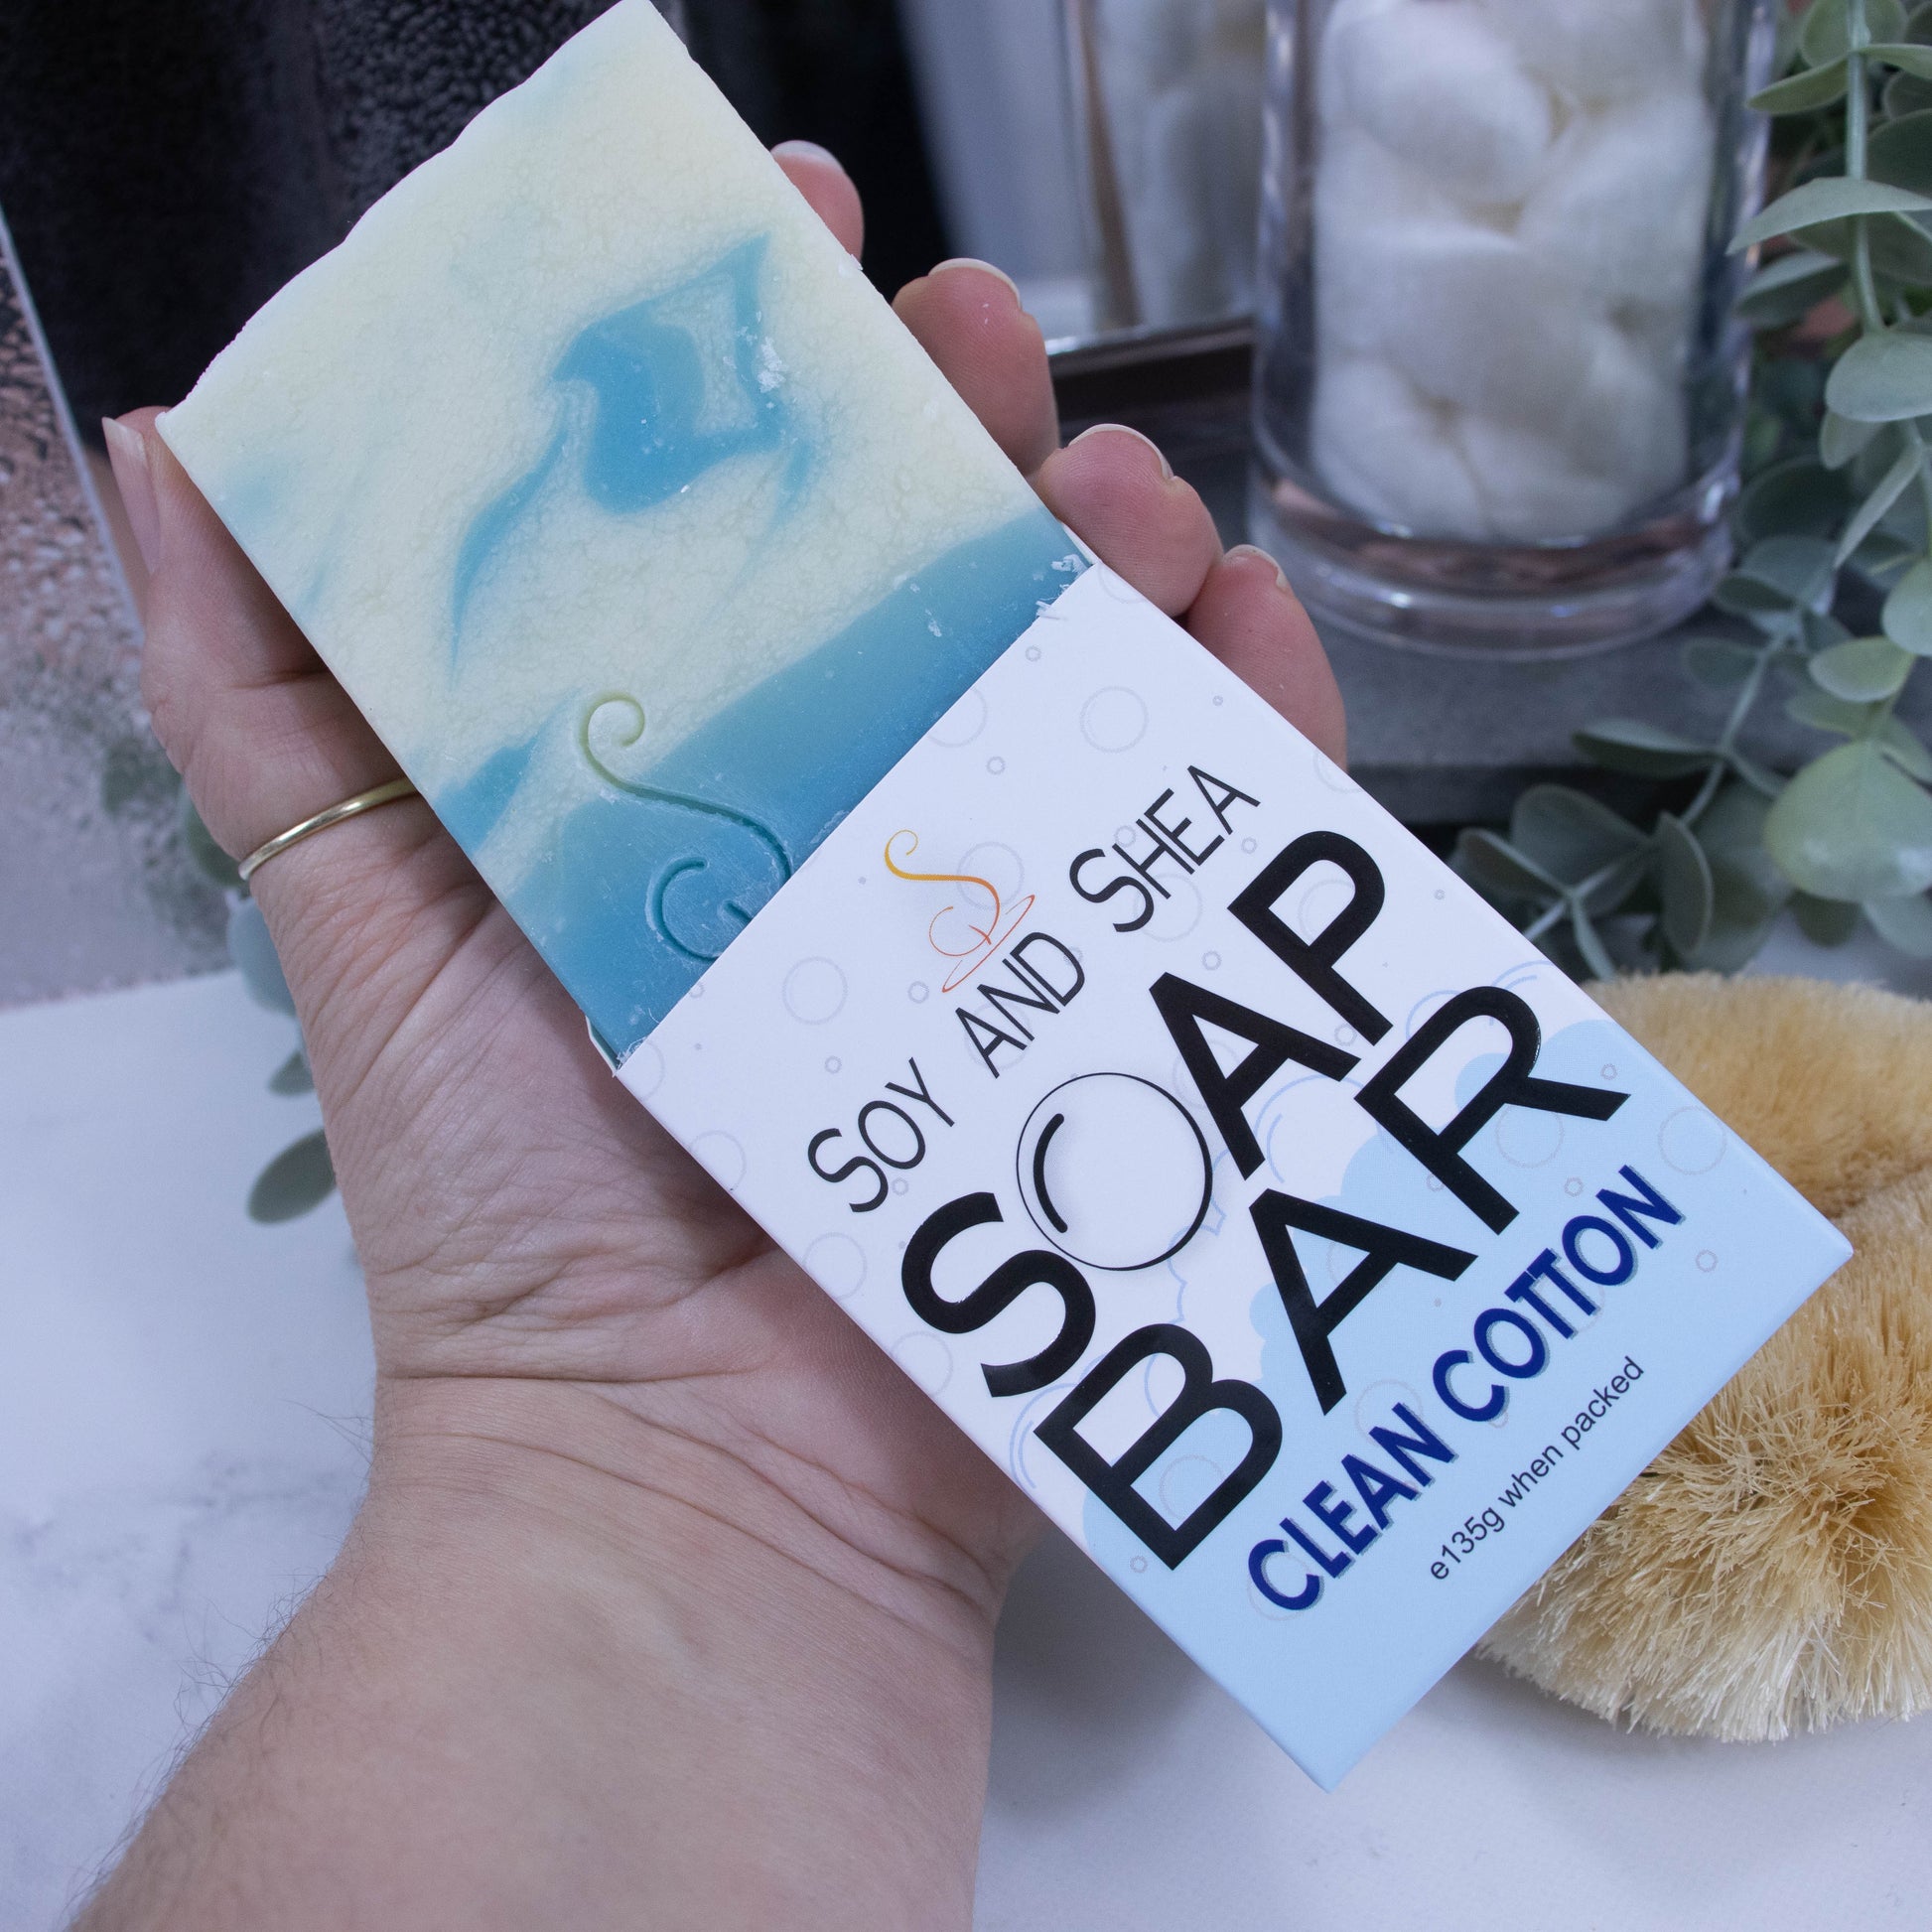 A hand is holding onto a box that has a bar of soap coming out the top. The lower half of the box has a pale blue bubble shaped border, and the top is white with grey bubbles. The box shows it is soap and the scent. The soap is rectangular in shape with a layered blue bottom and the top is white with blue swirls.